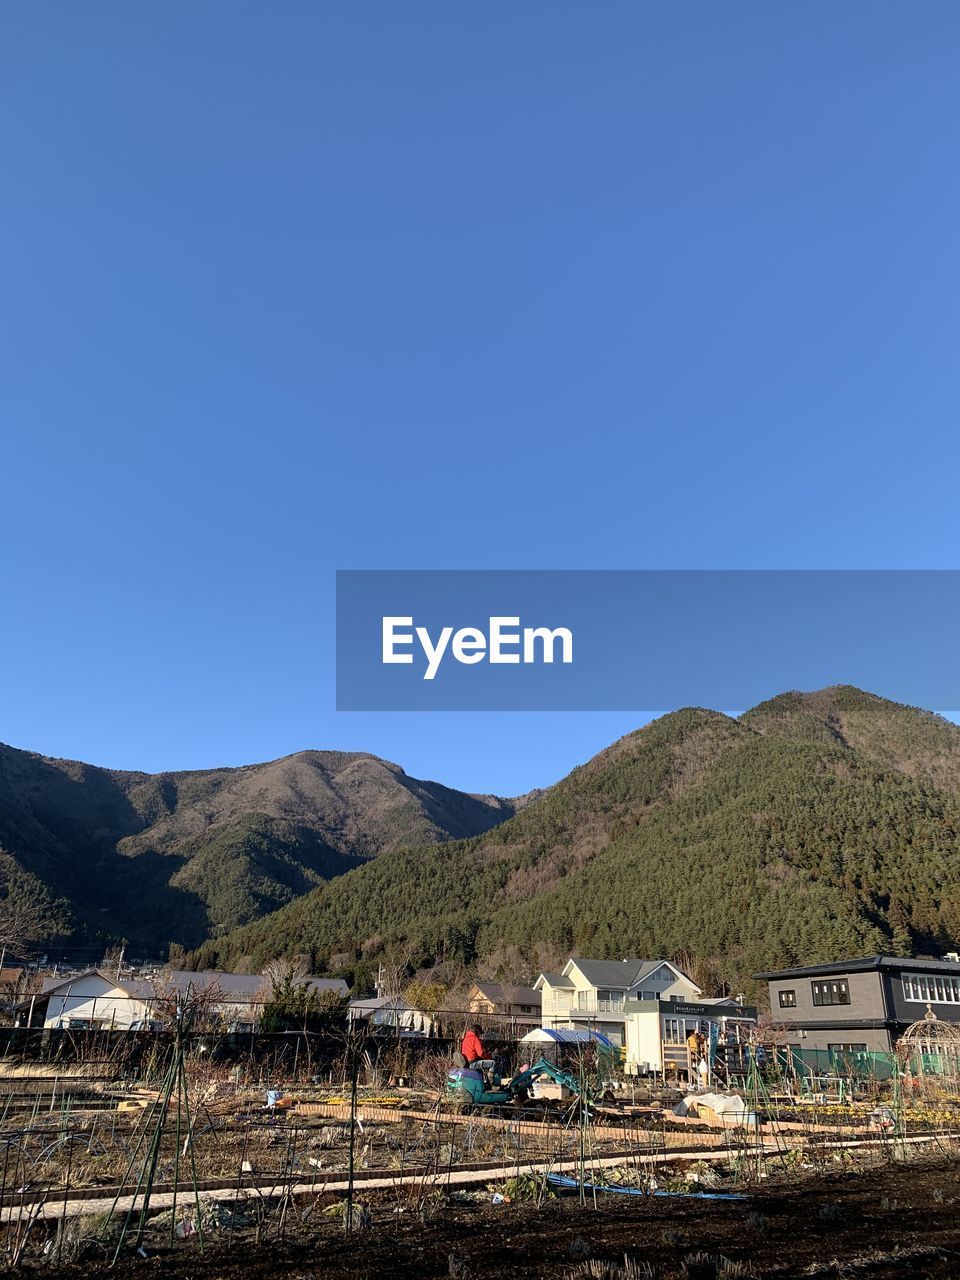 SCENIC VIEW OF MOUNTAINS AGAINST CLEAR SKY